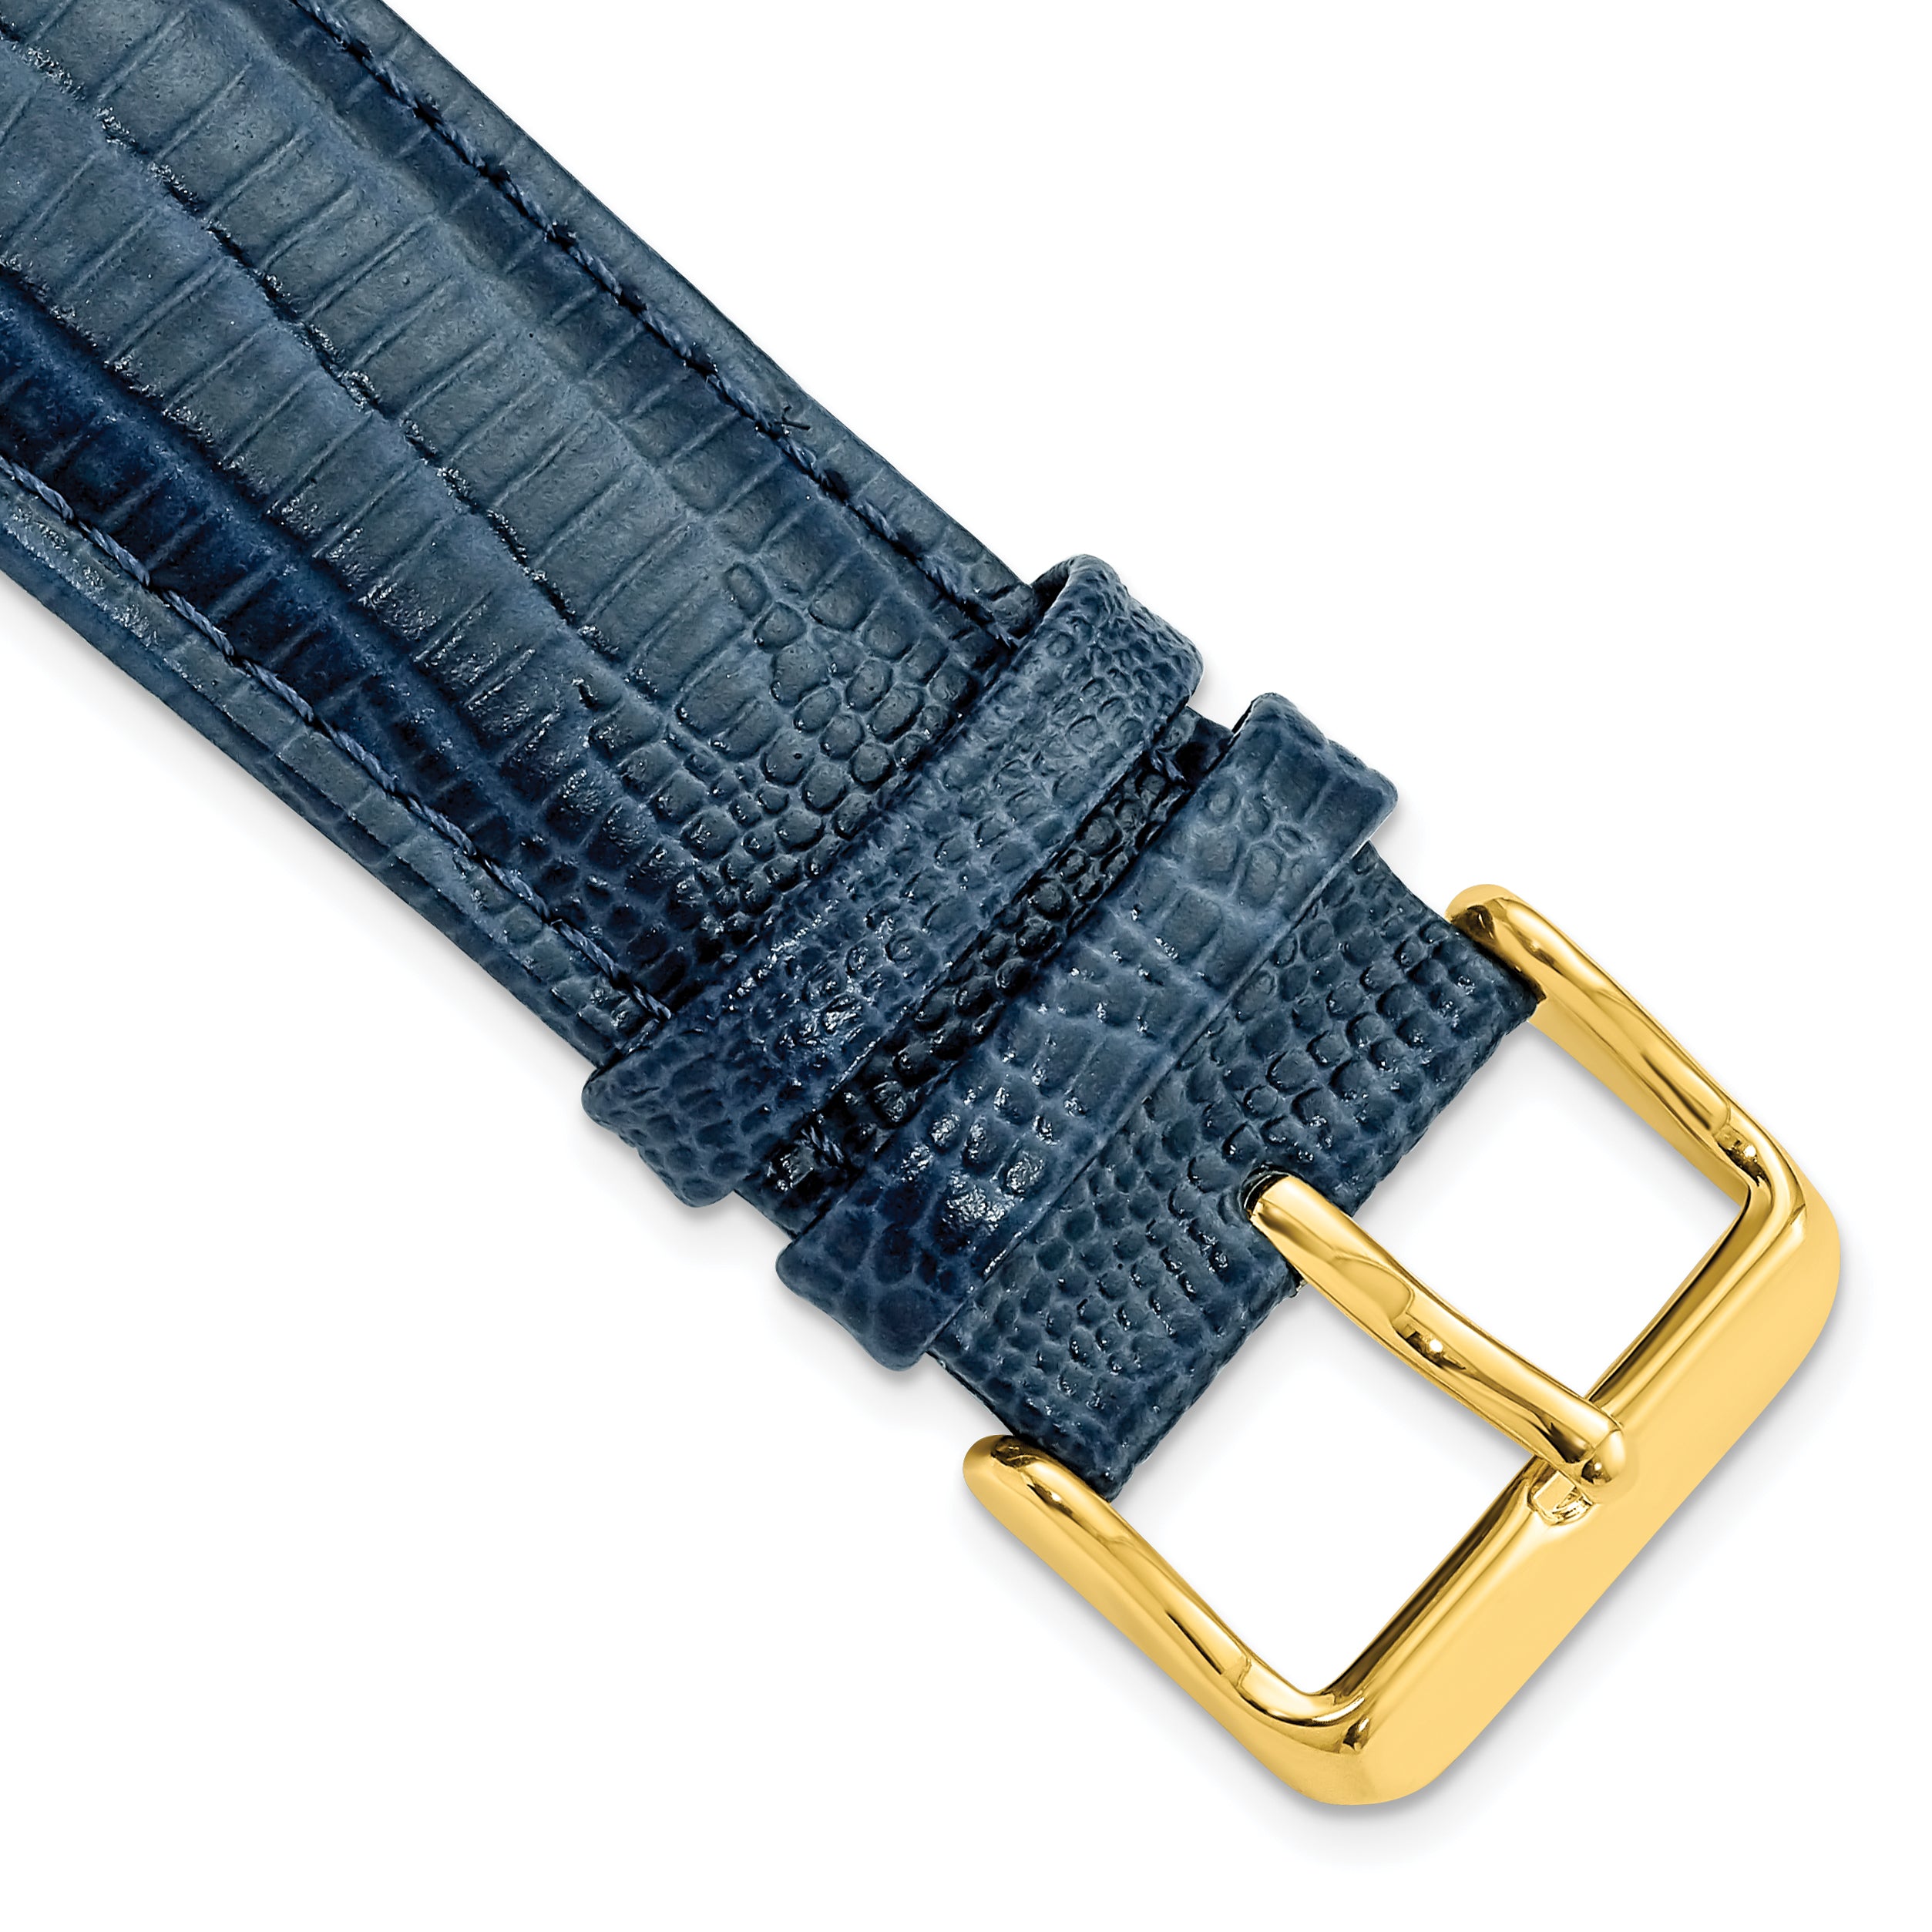 DeBeer 22mm Navy Teju Liz Grain Leather with Gold-tone Buckle 7.5 inch Watch Band